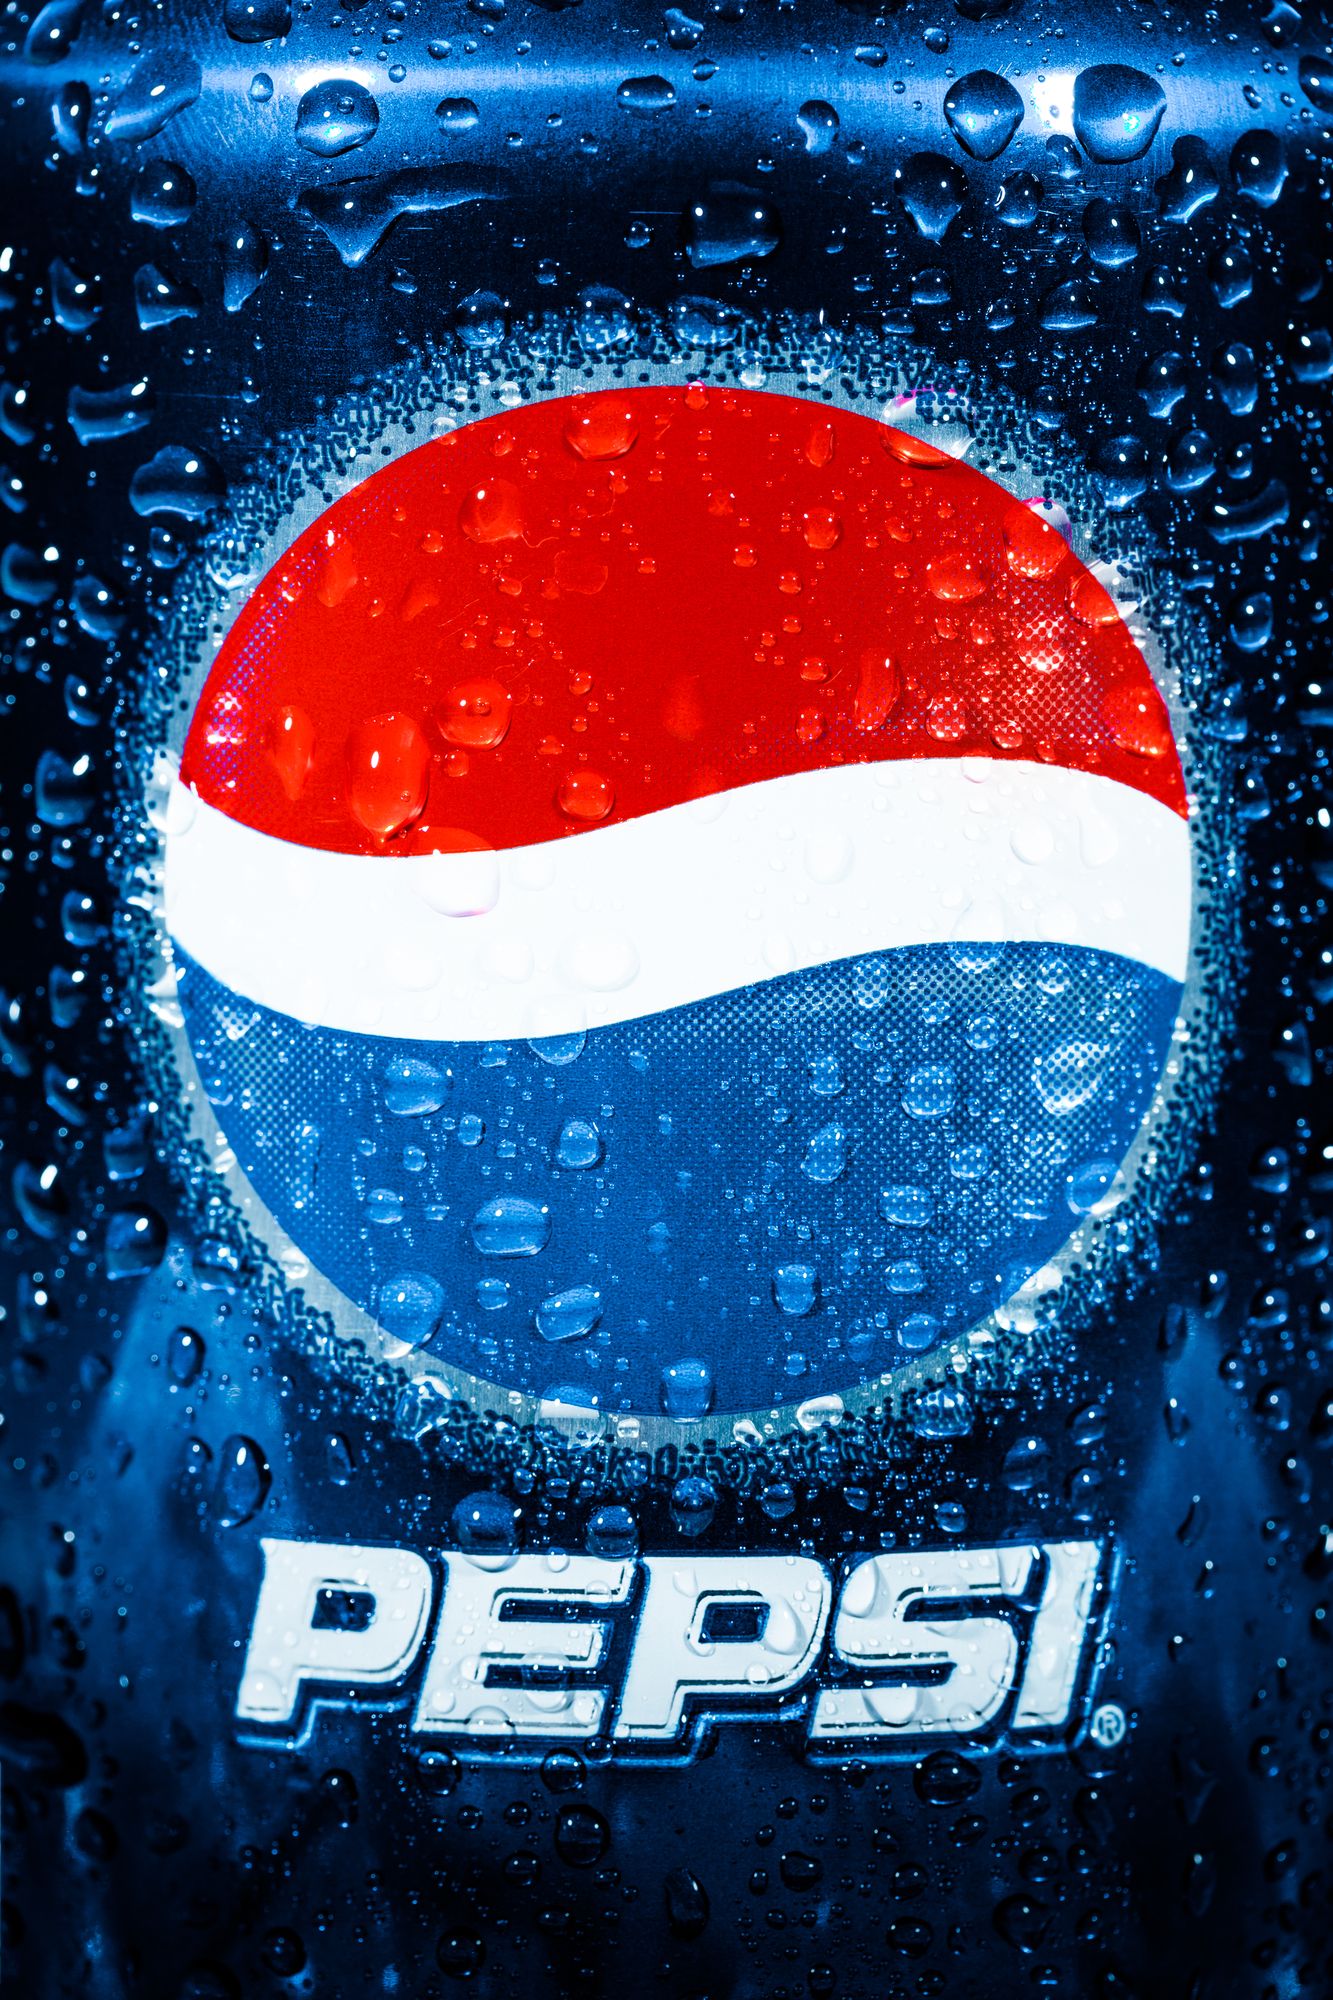 MOSCOW, RUSSIA-APRIL 4, 2014: Can of Pepsi cola closeup. Pepsi is a carbonated soft drink that is produced and manufactured by PepsiCo. Created and developed in 1893.